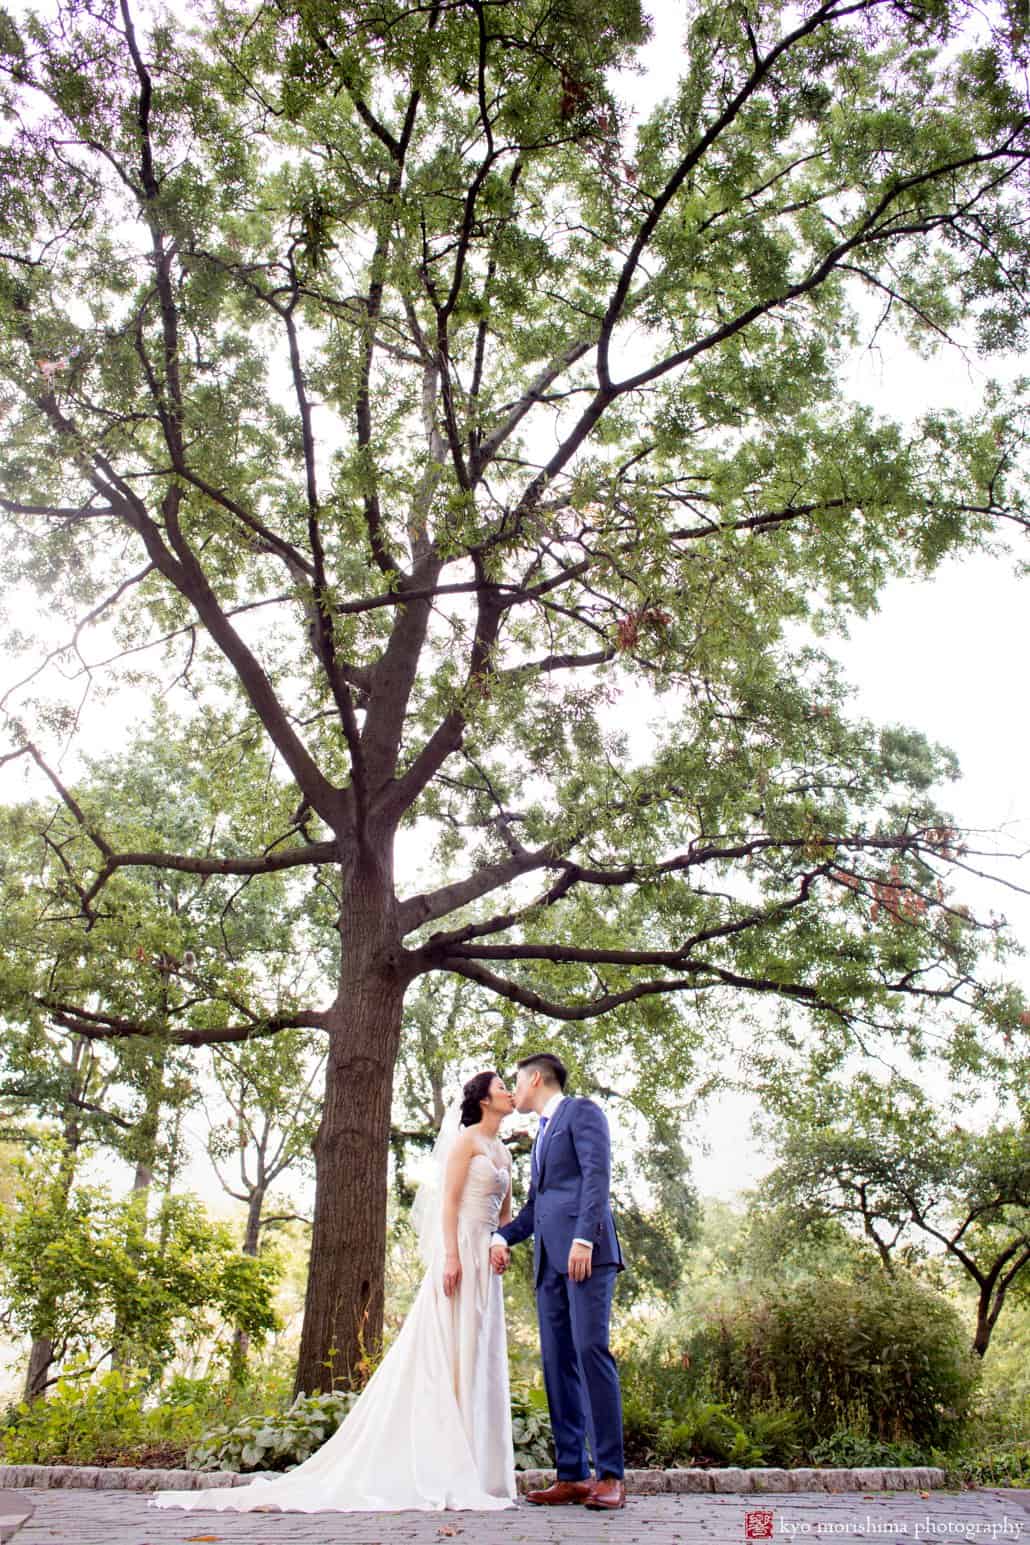 Bride and groom kiss under a large tree in a park on Wall Street, photographed by Kyo Morishima